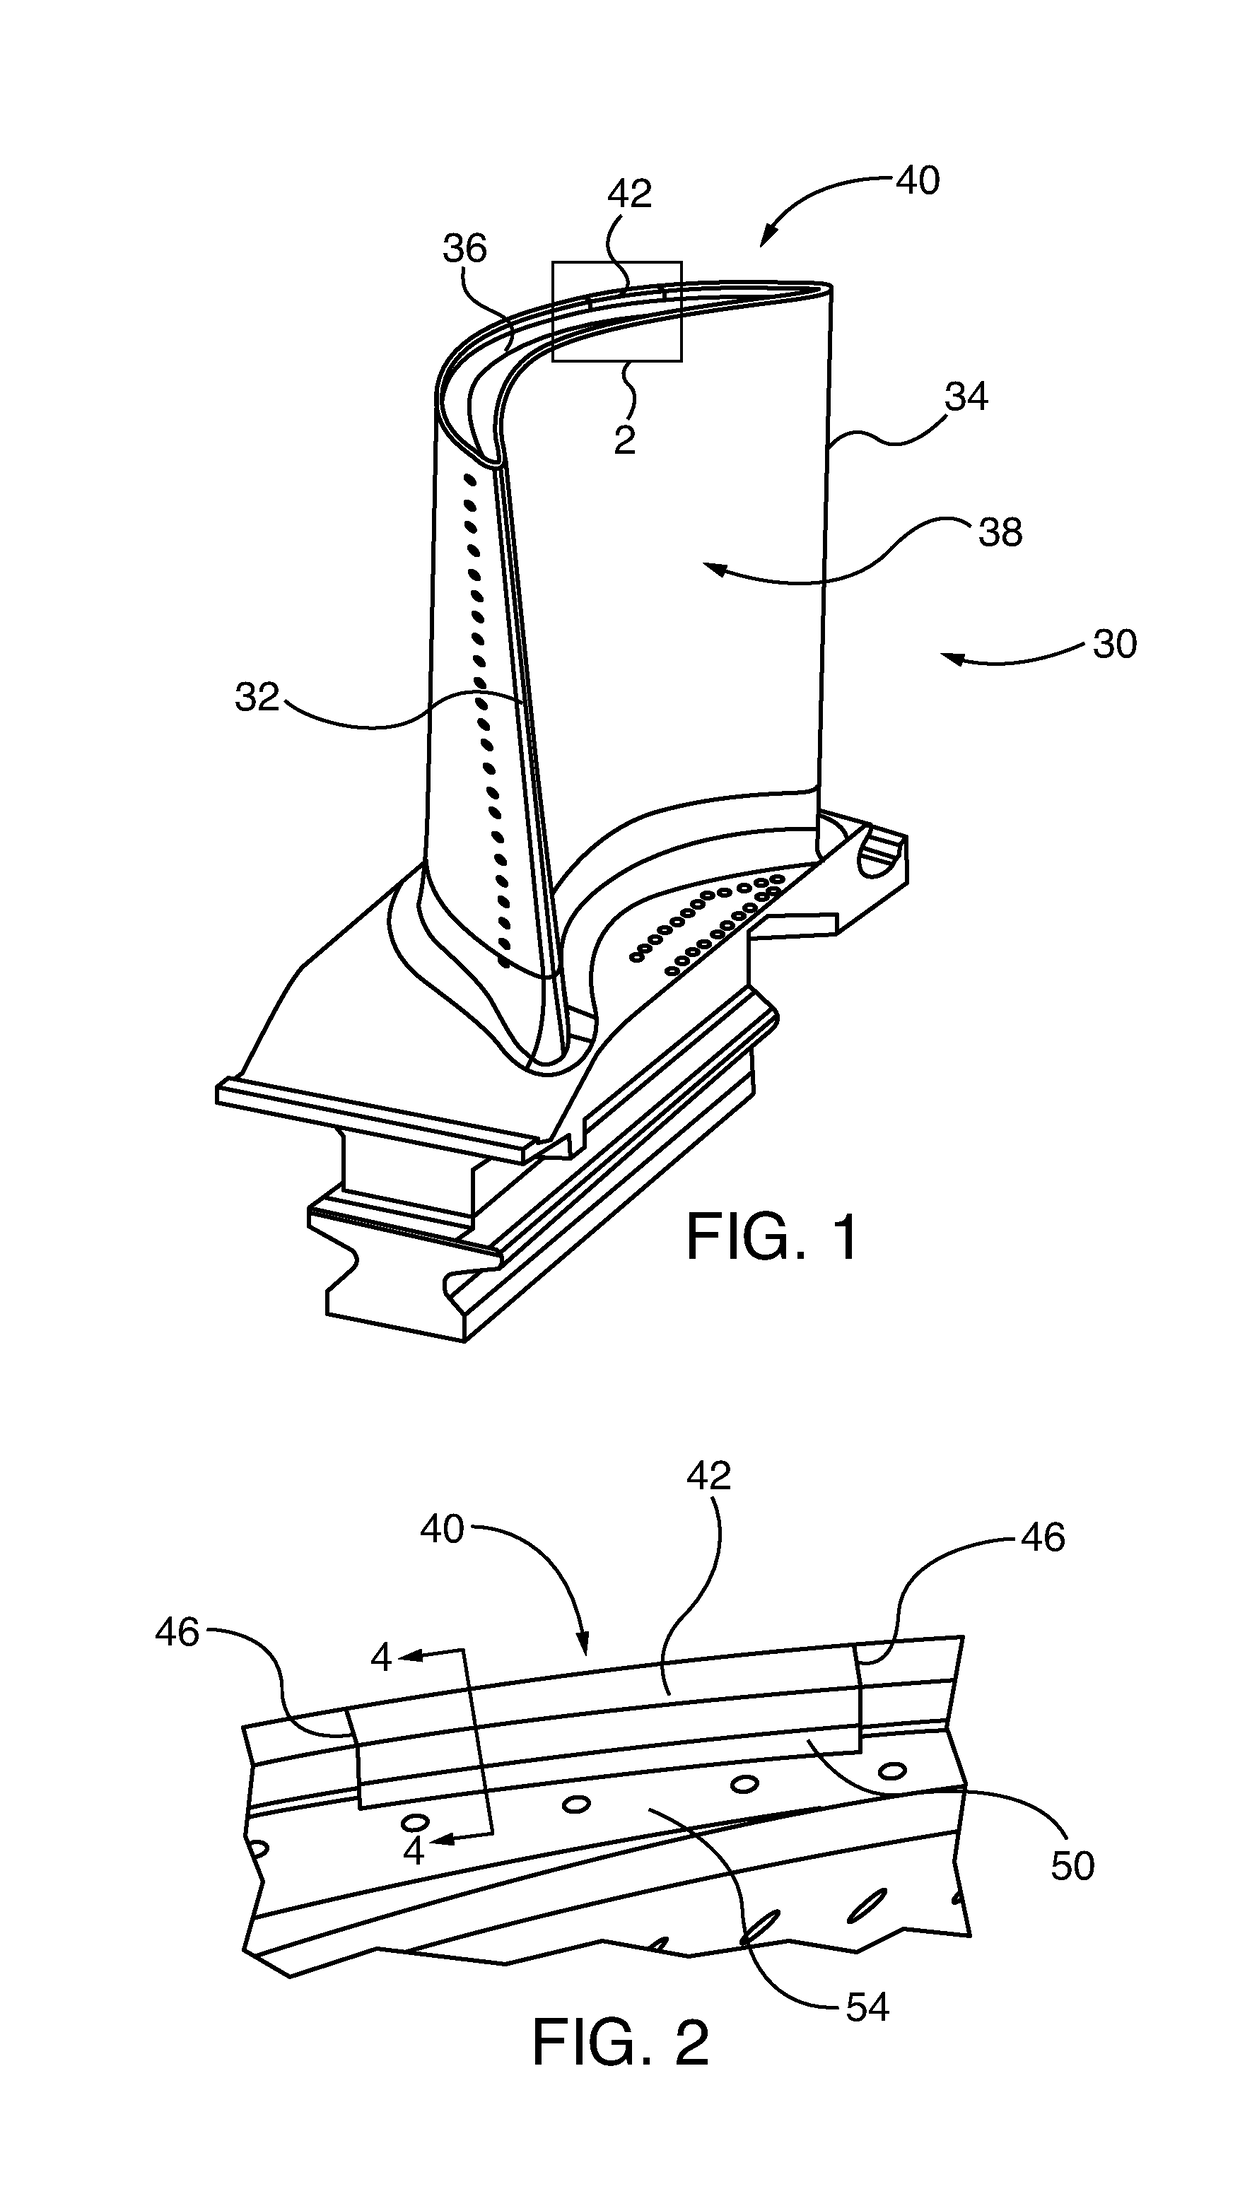 Method for manufacturing and repairing a composite construction turbine blade